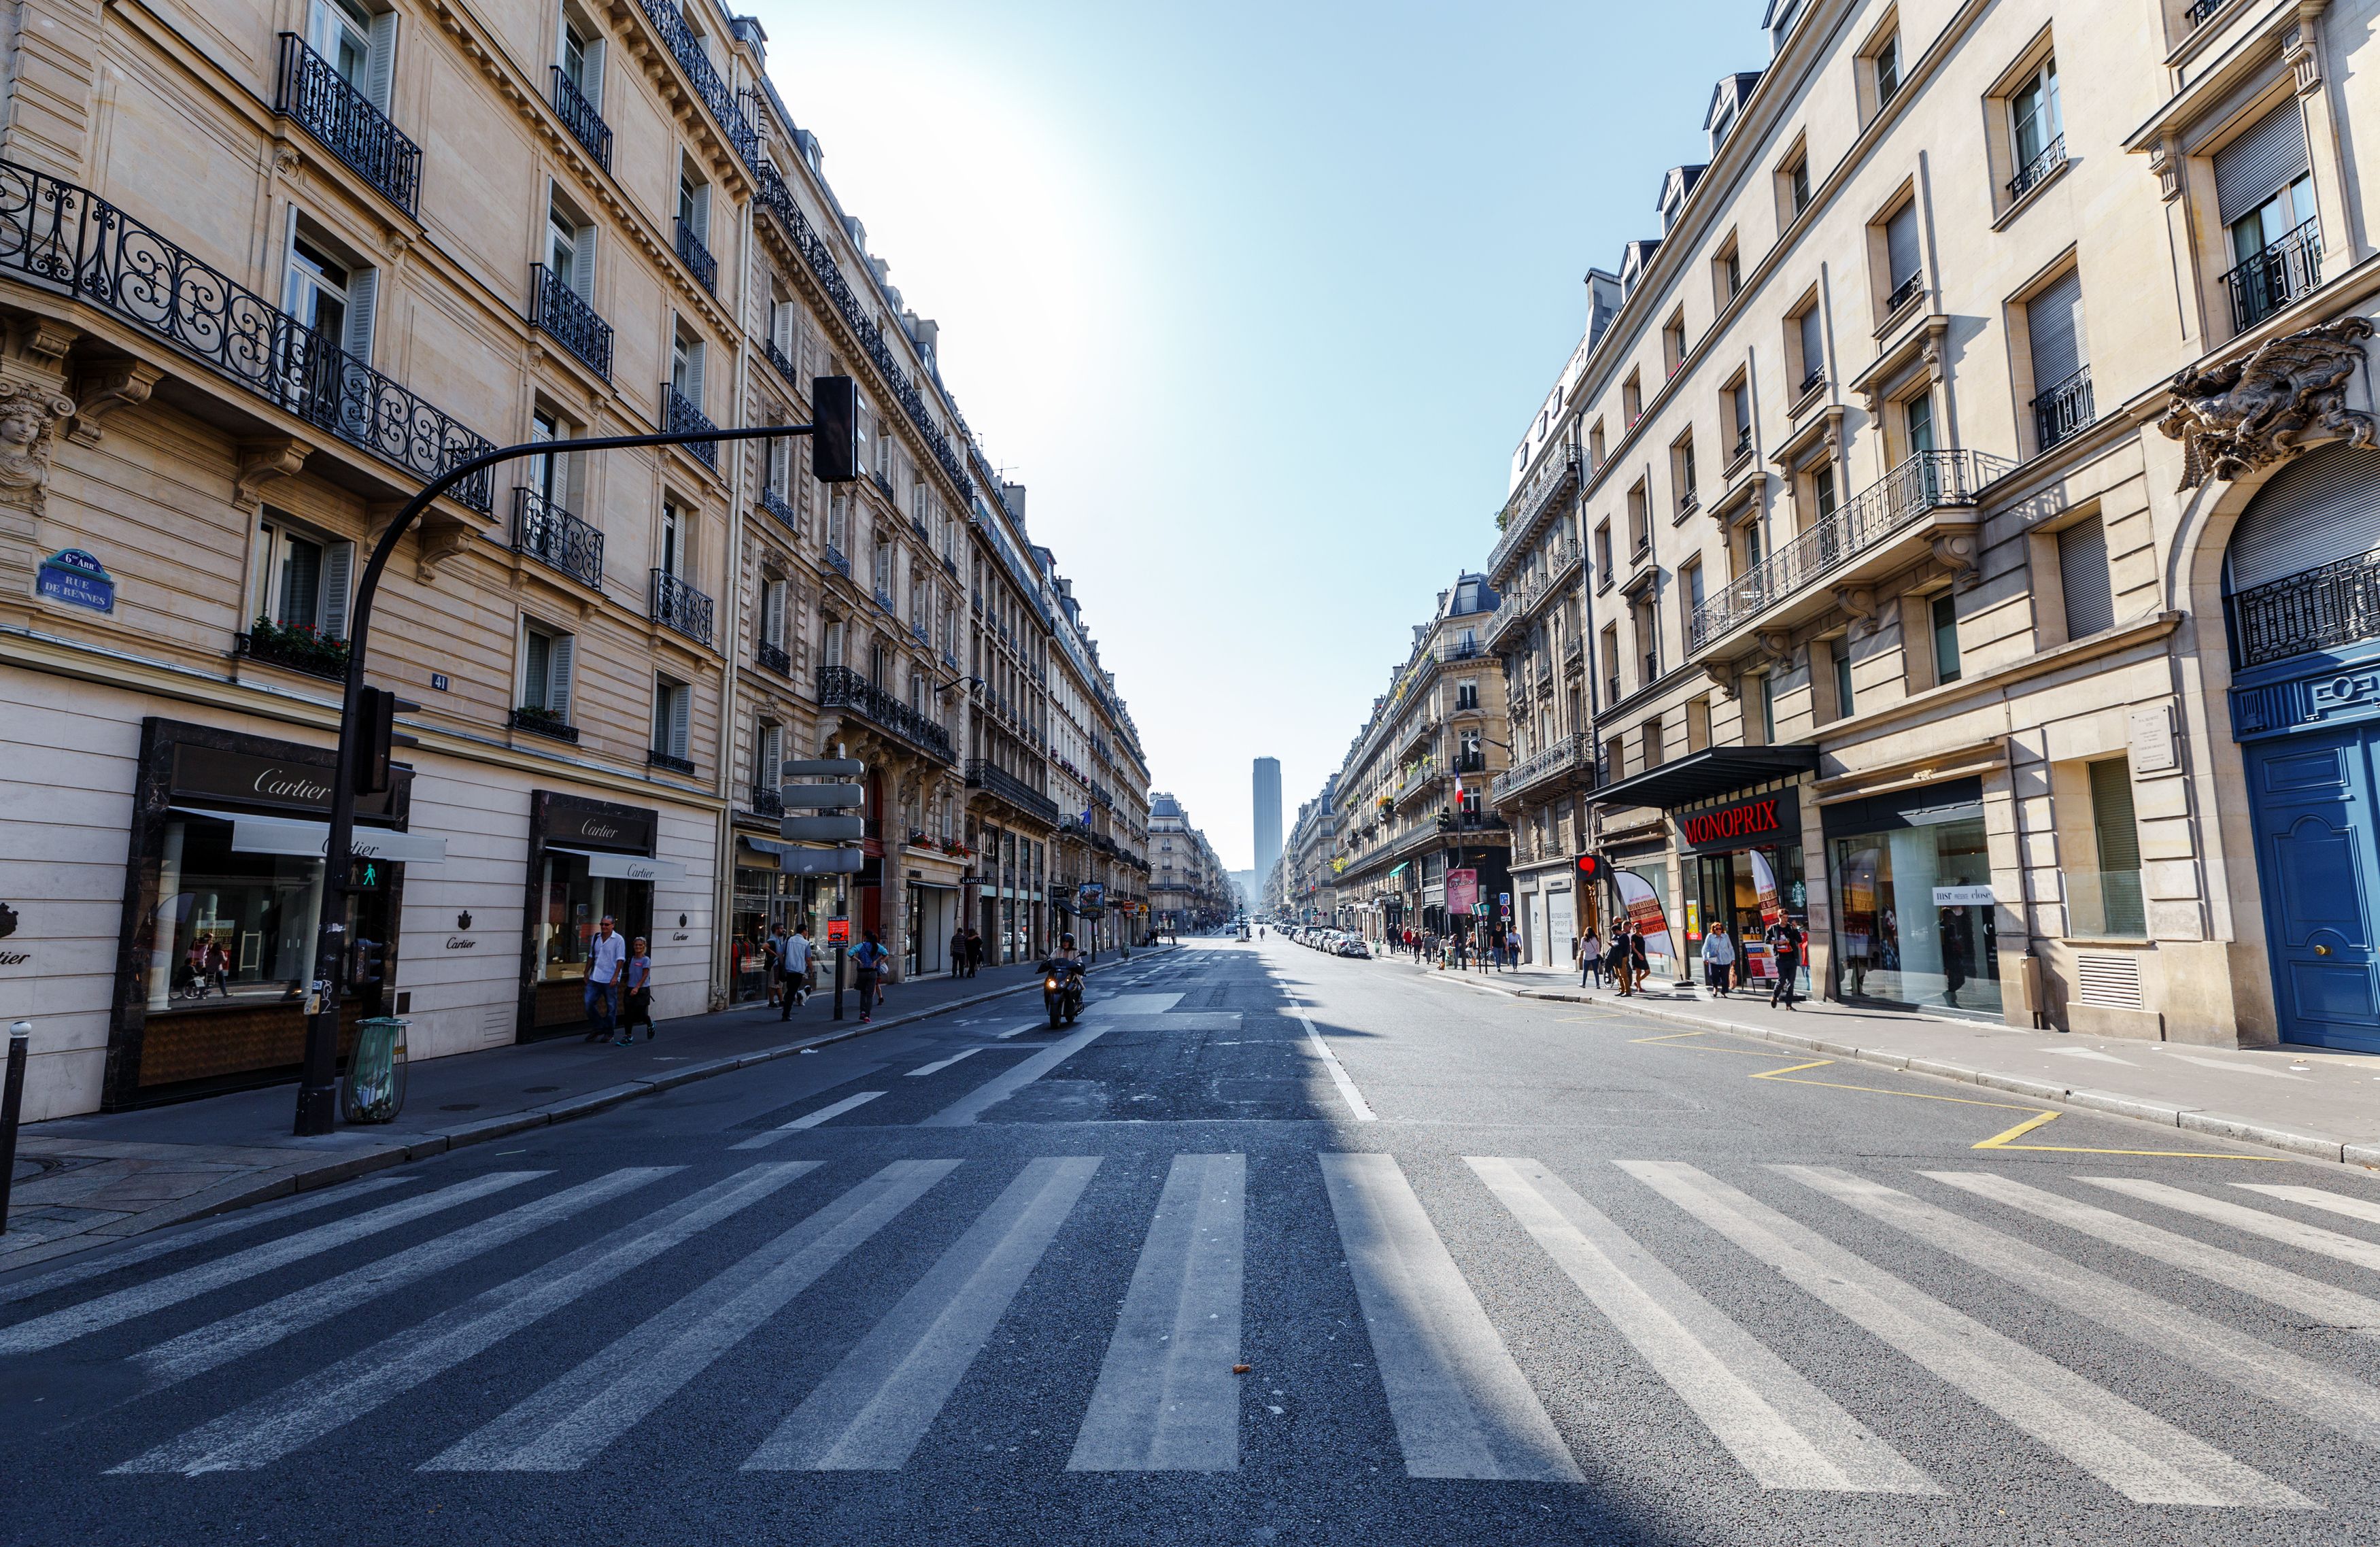 Champs-Élysées in Paris - A Luxury Shopping Street with Iconic Landmarks –  Go Guides